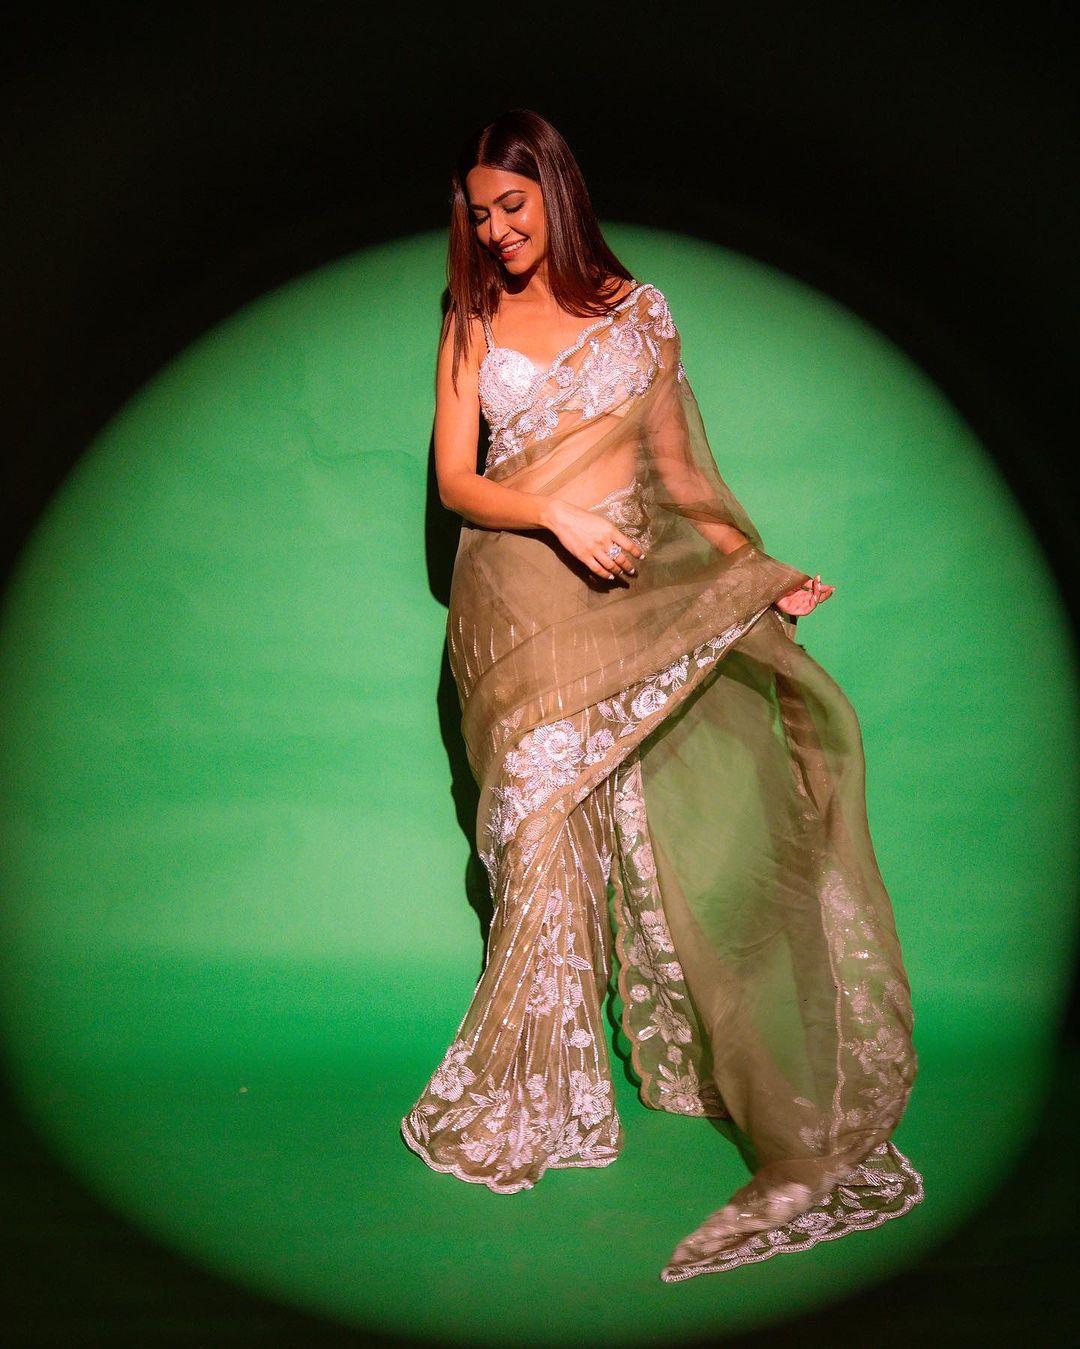 Kriti never misses a mark when it comes to wearing a saree. In this look, the actress wore a stunning beige saree with contrasting white designs on it